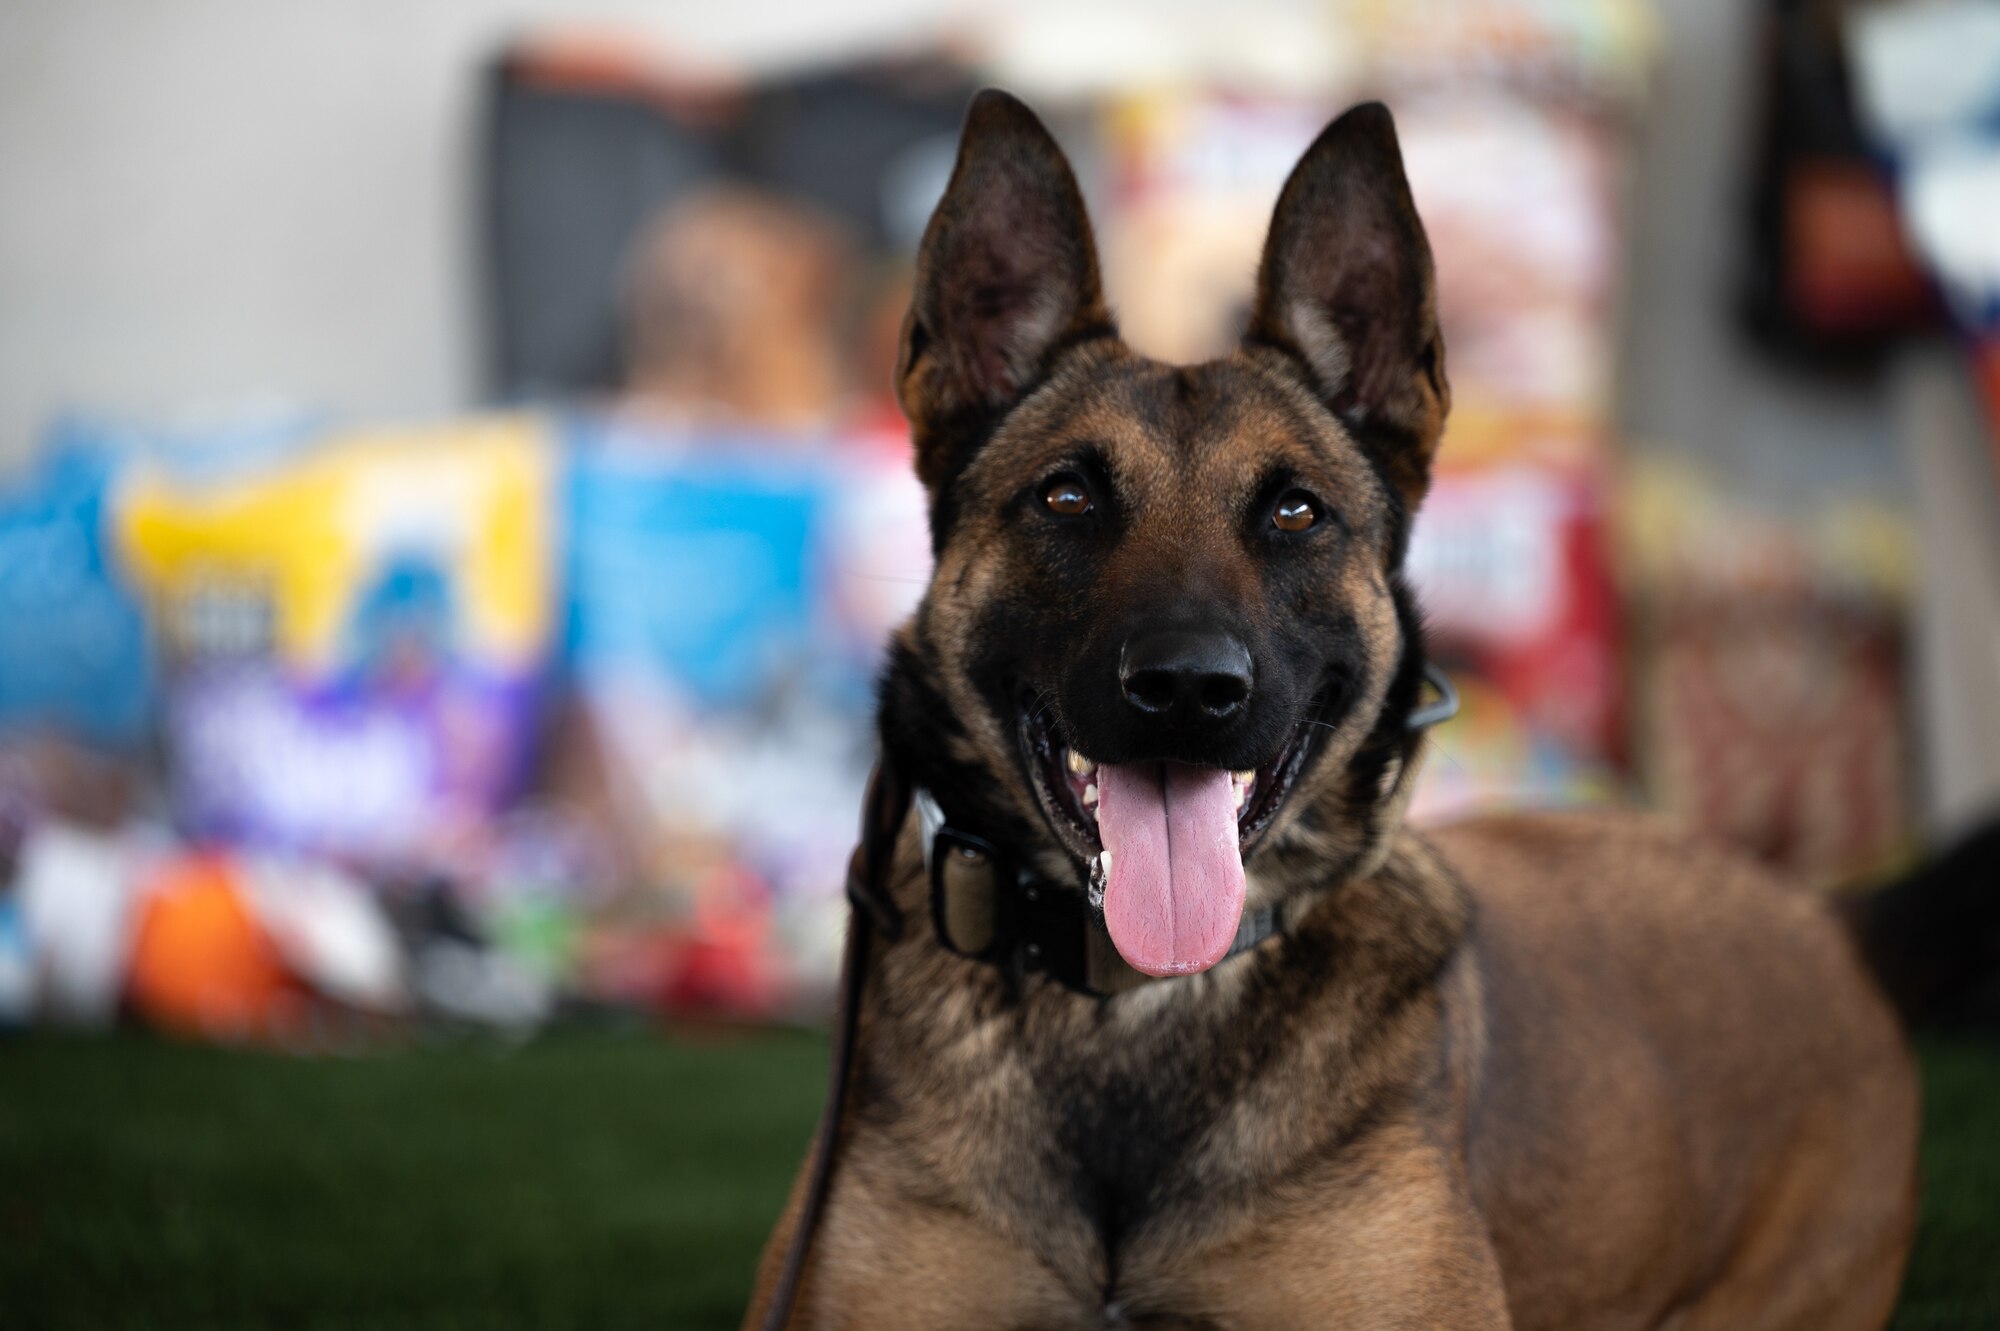 A dog is photographed in front of dog supplies